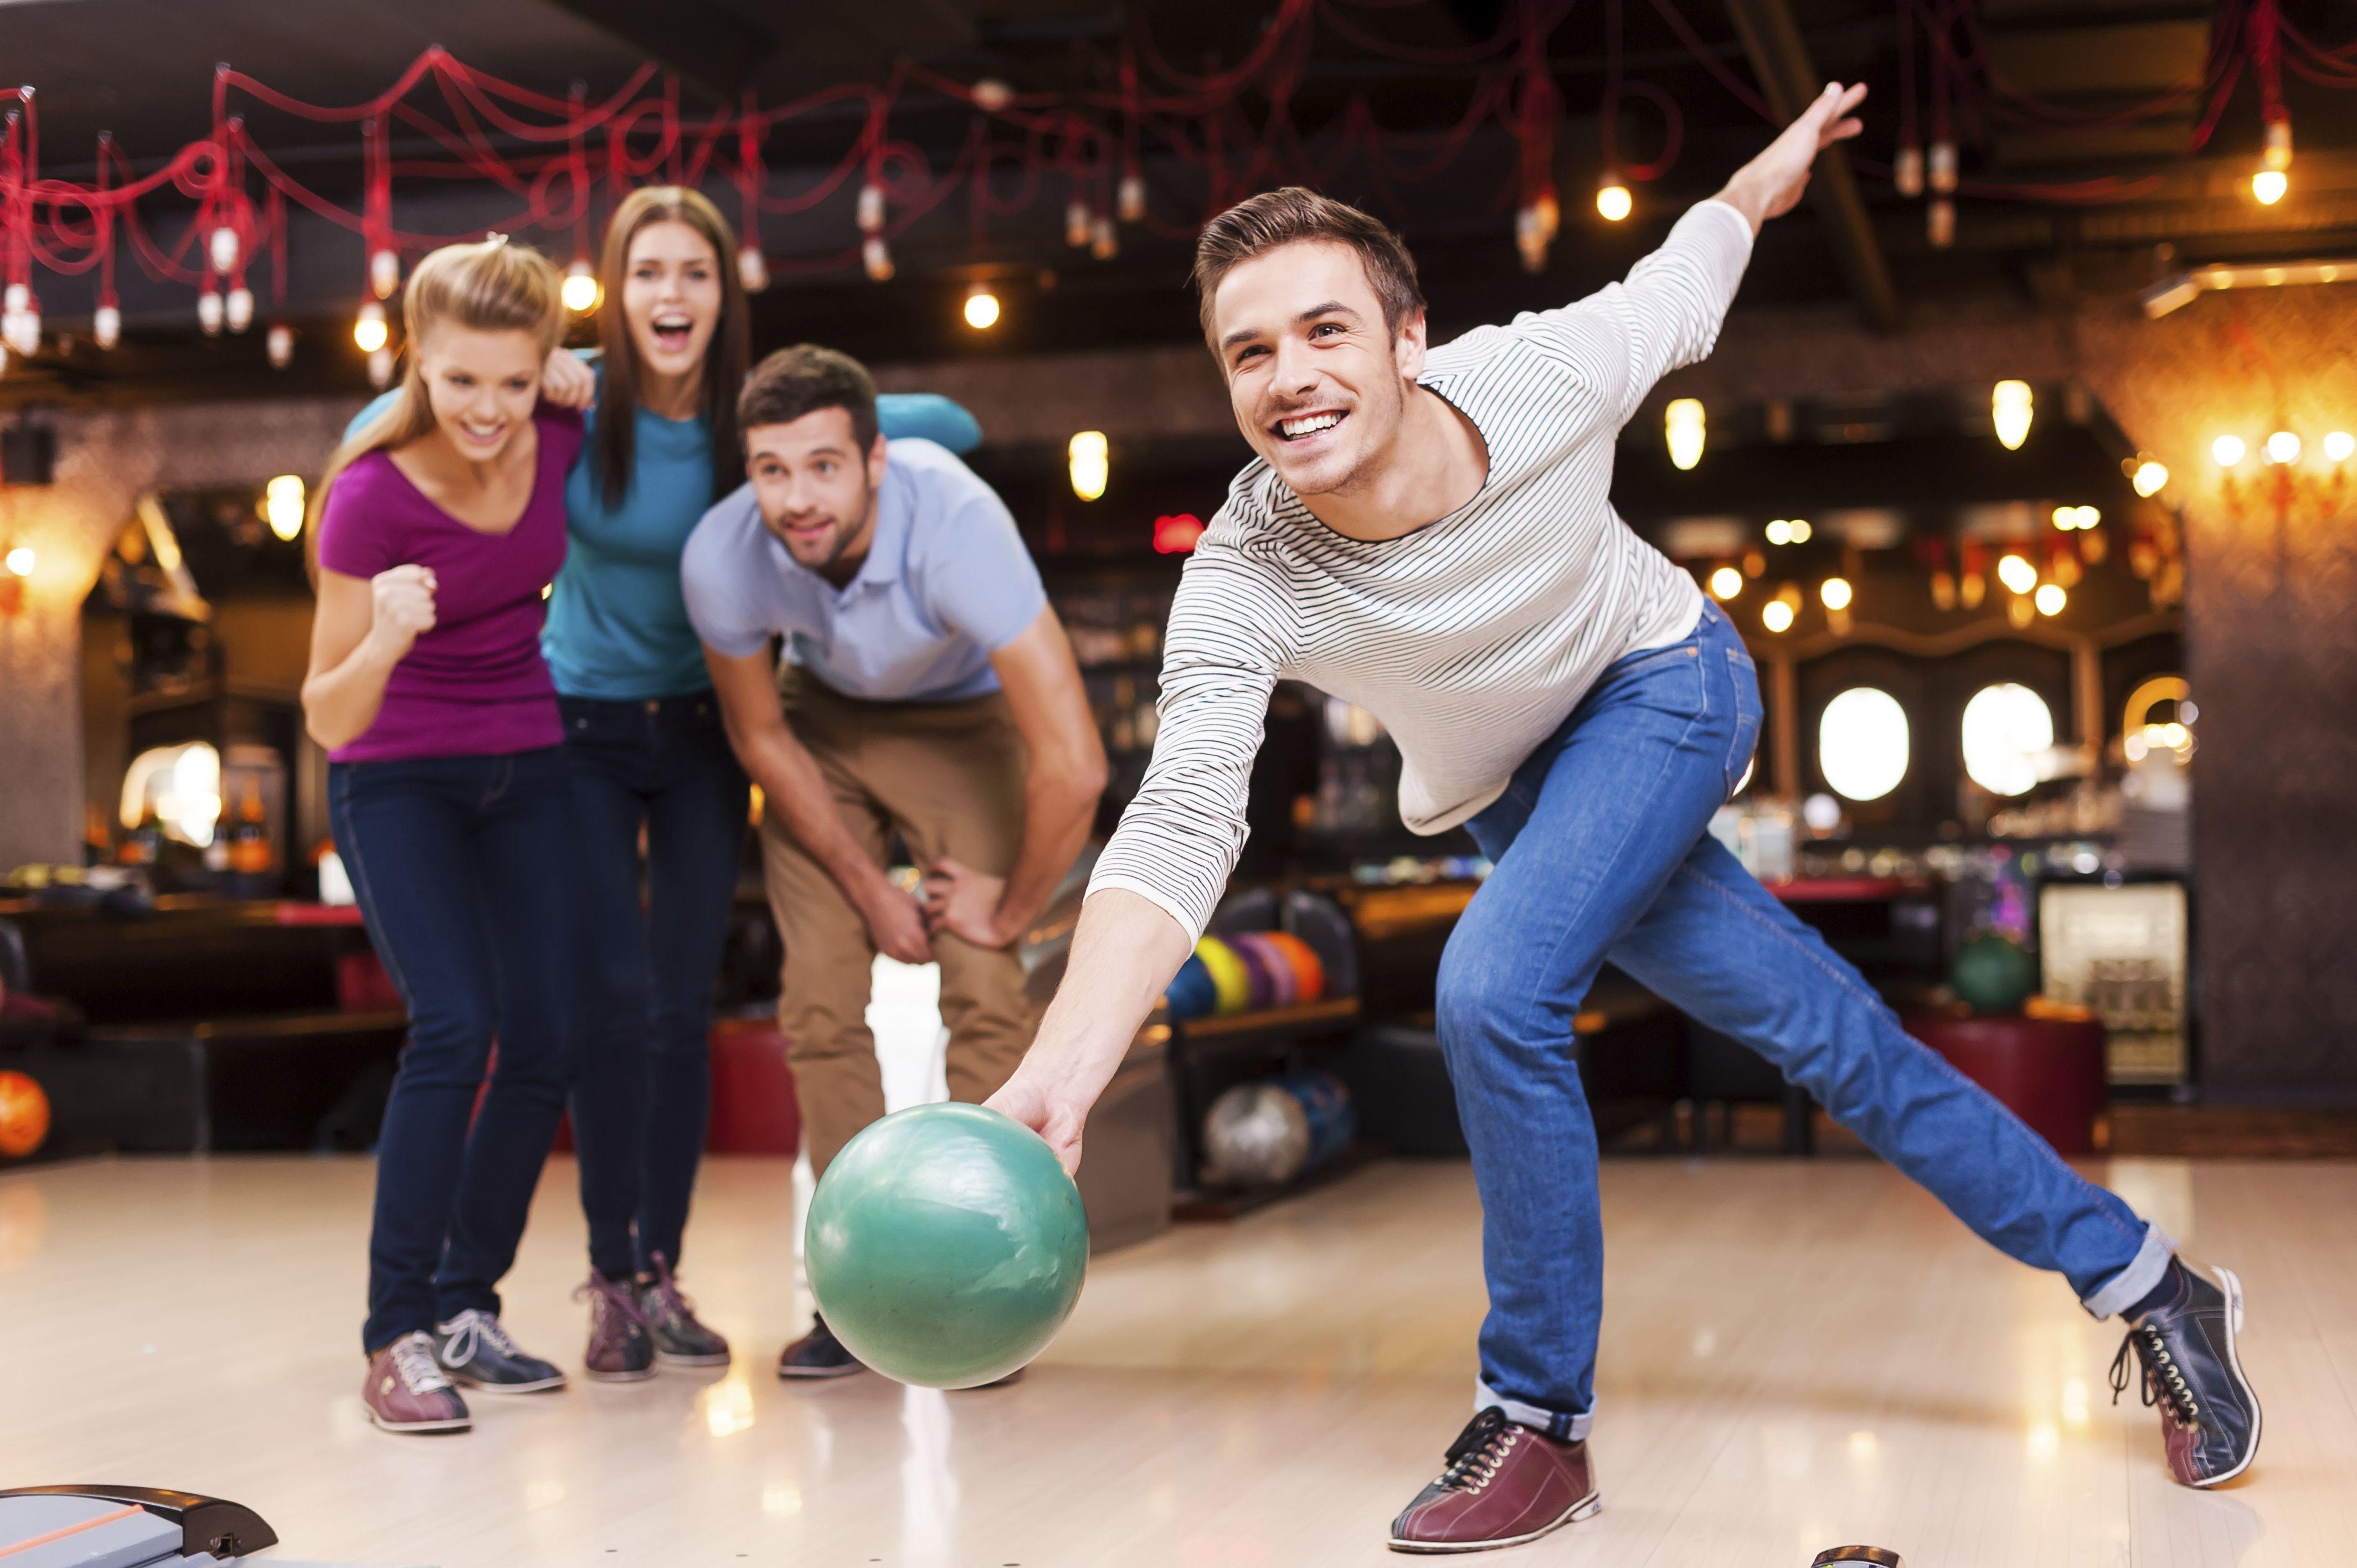 Bowling Wallpaper Image Photo Picture Background